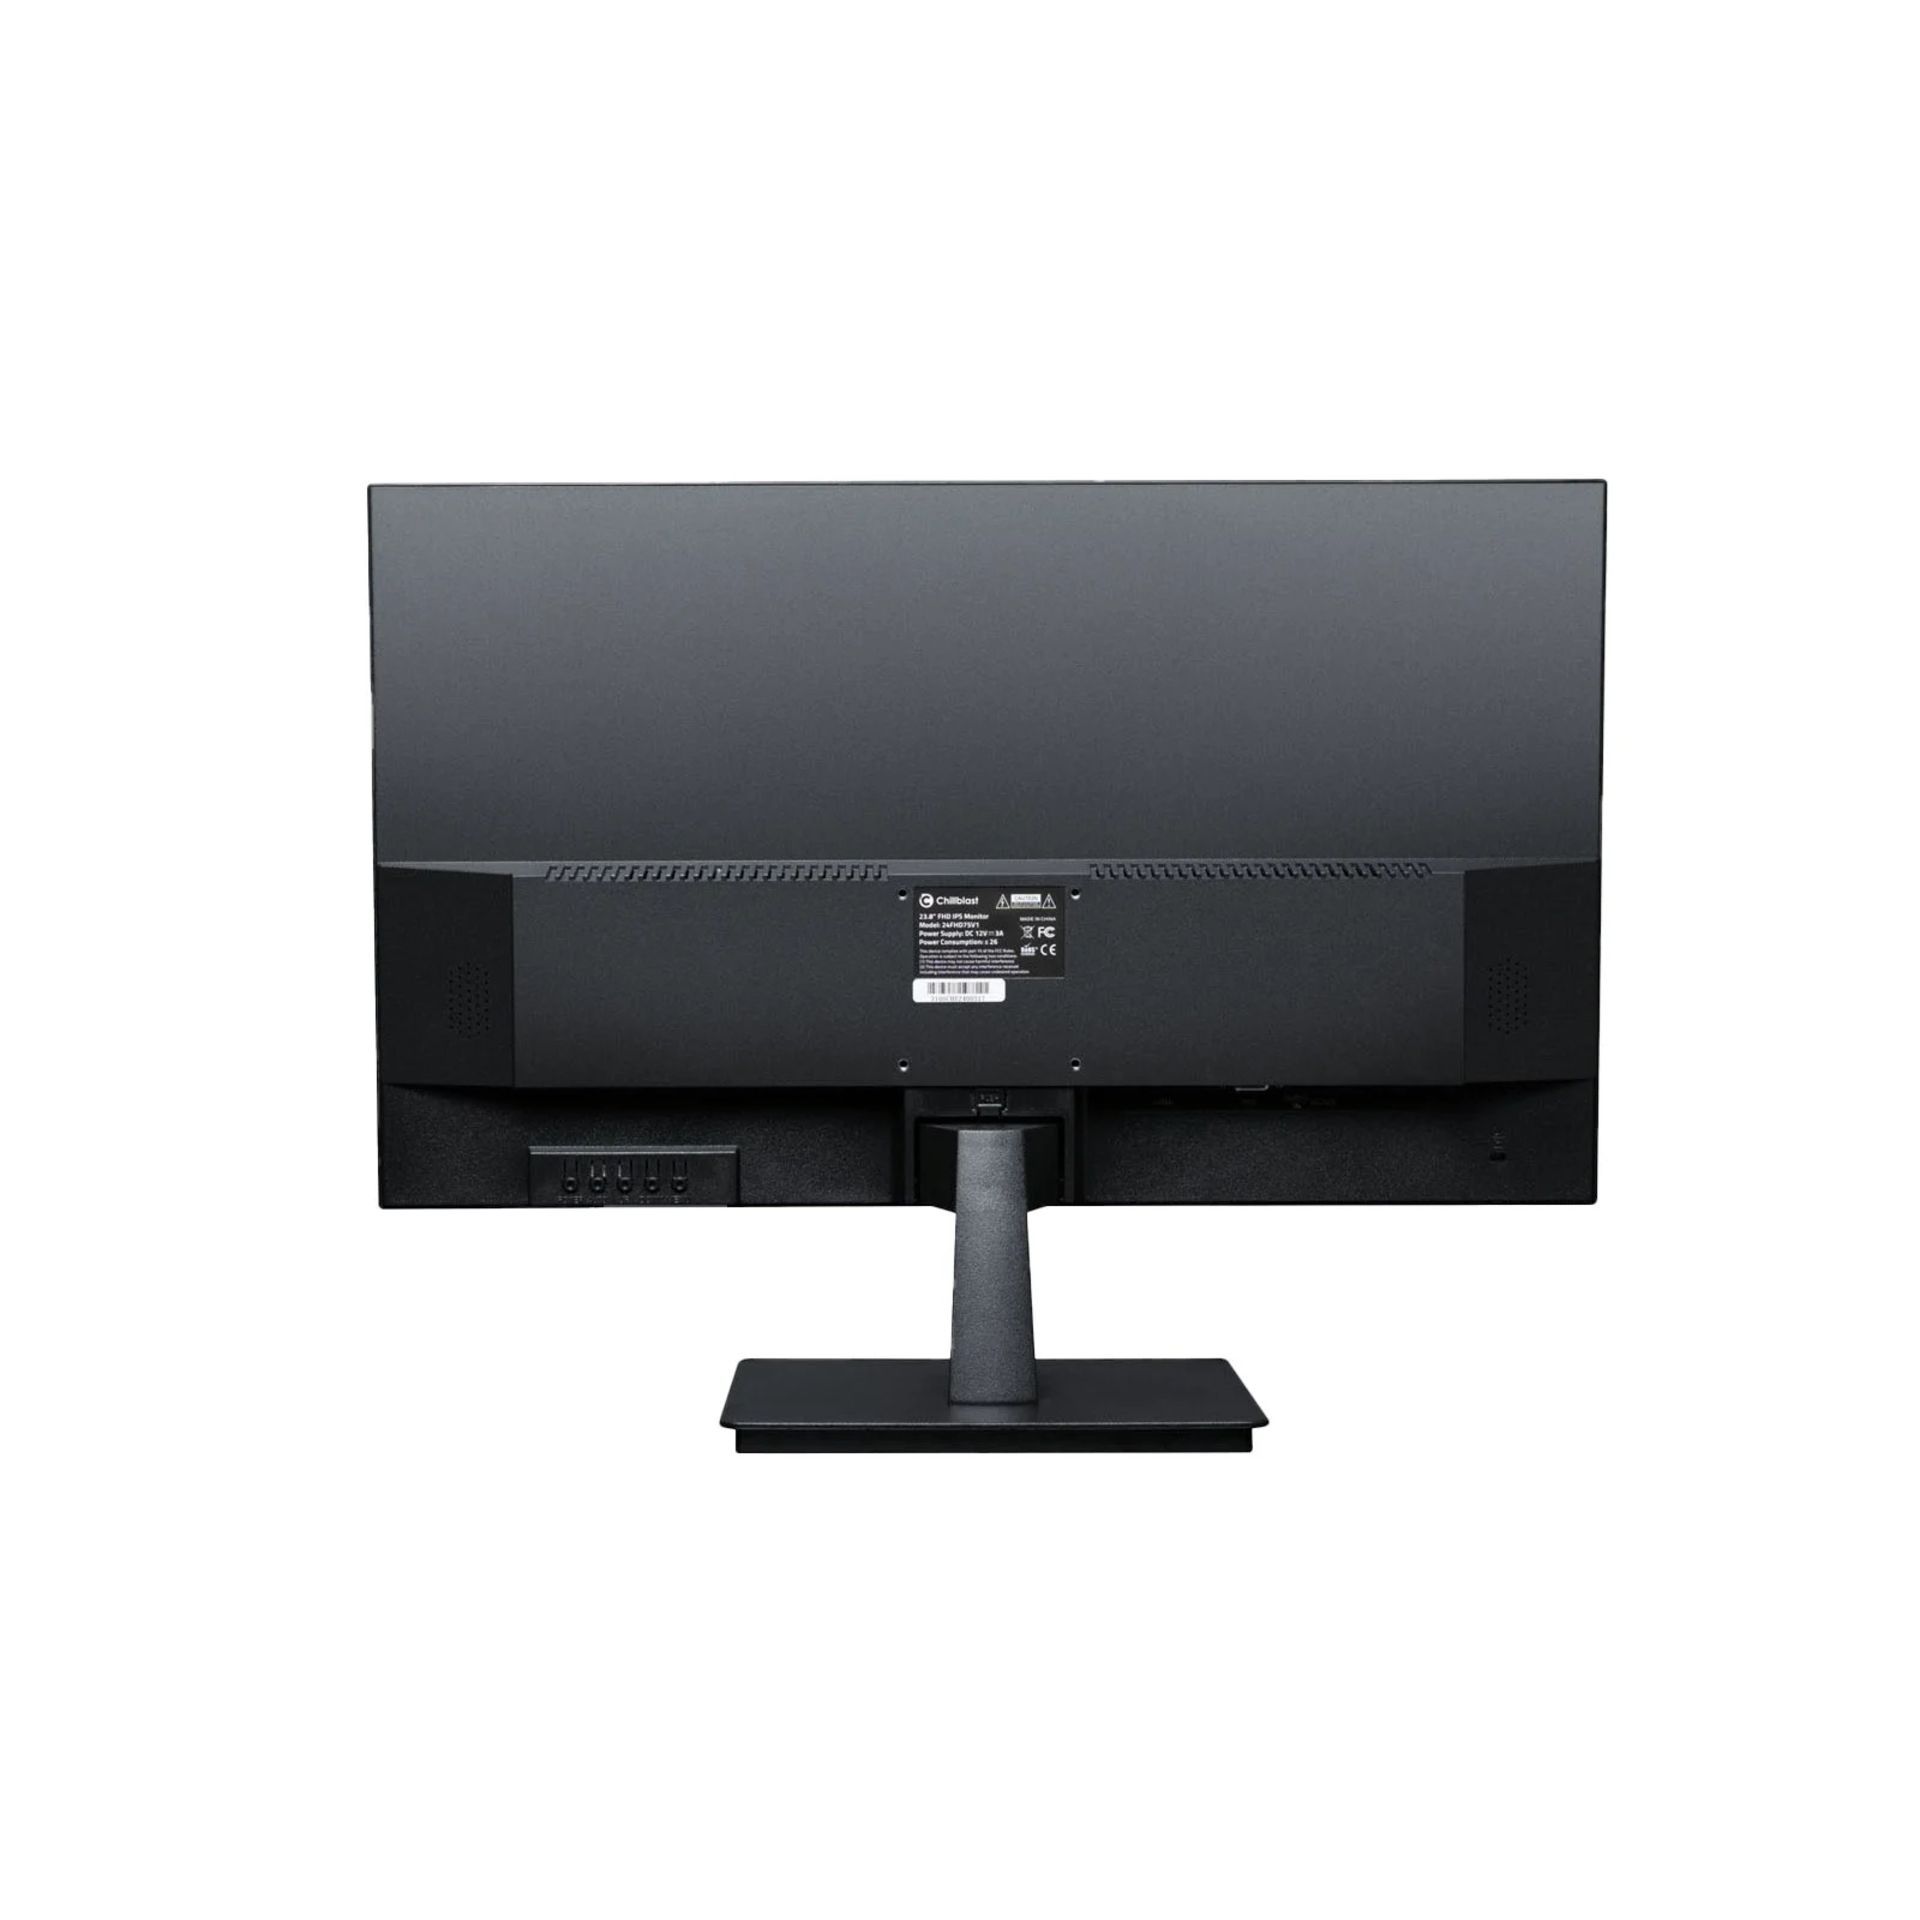 NEW & BOXED CHILLBLAST 24FHD100V1 24 Inch Full HD Gaming Monitor. RRP £129. (PCKBW). For gamers to - Image 2 of 2